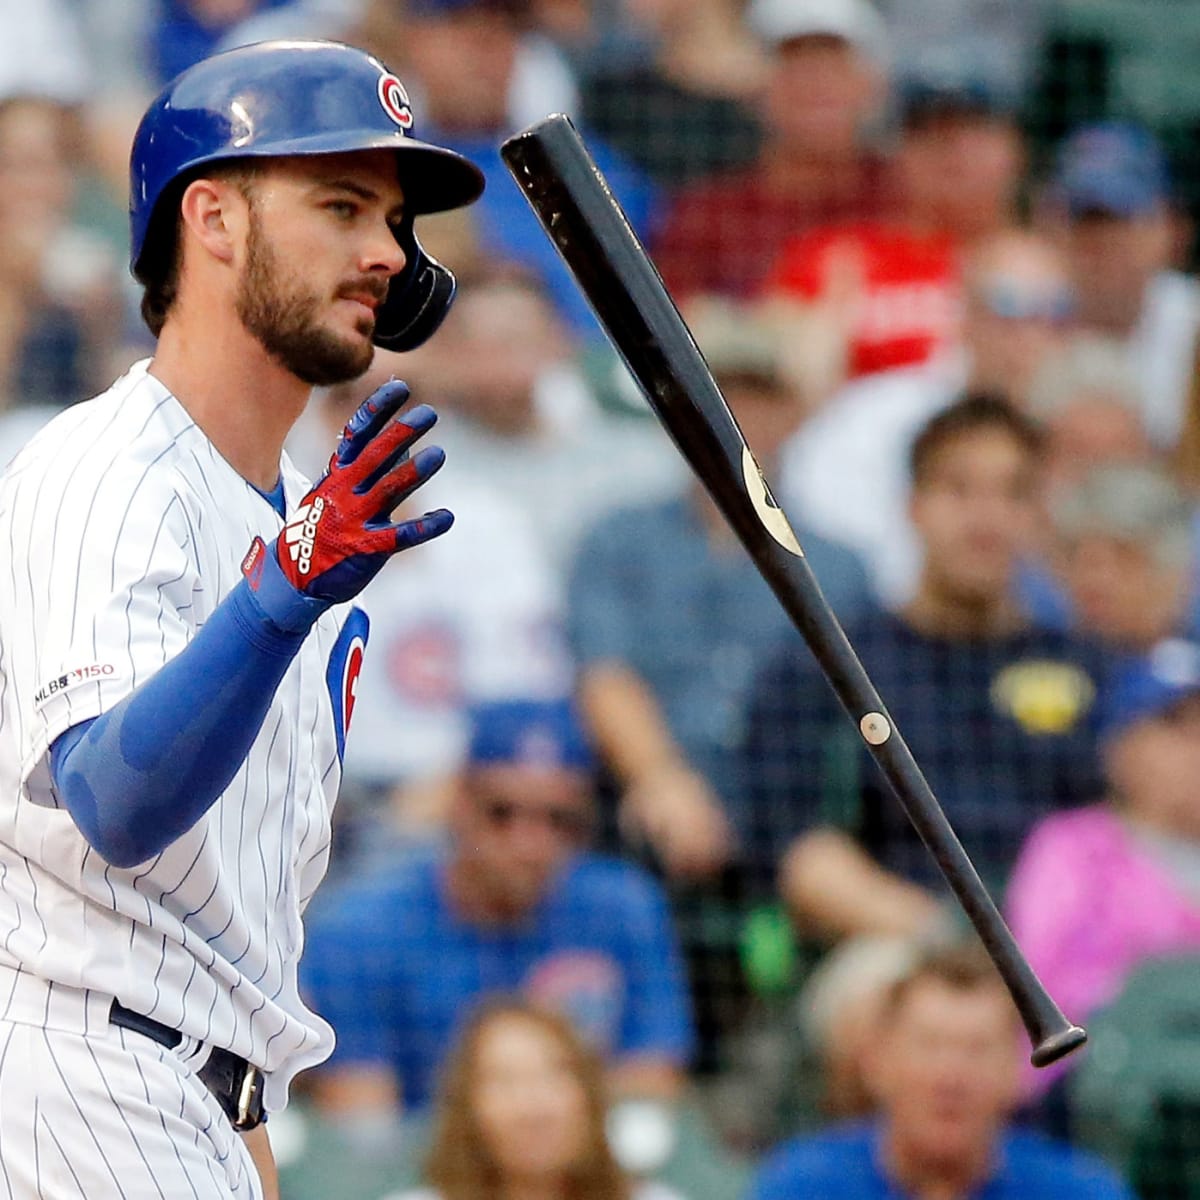 Thursday expected to be Kris Bryant's final game in Iowa